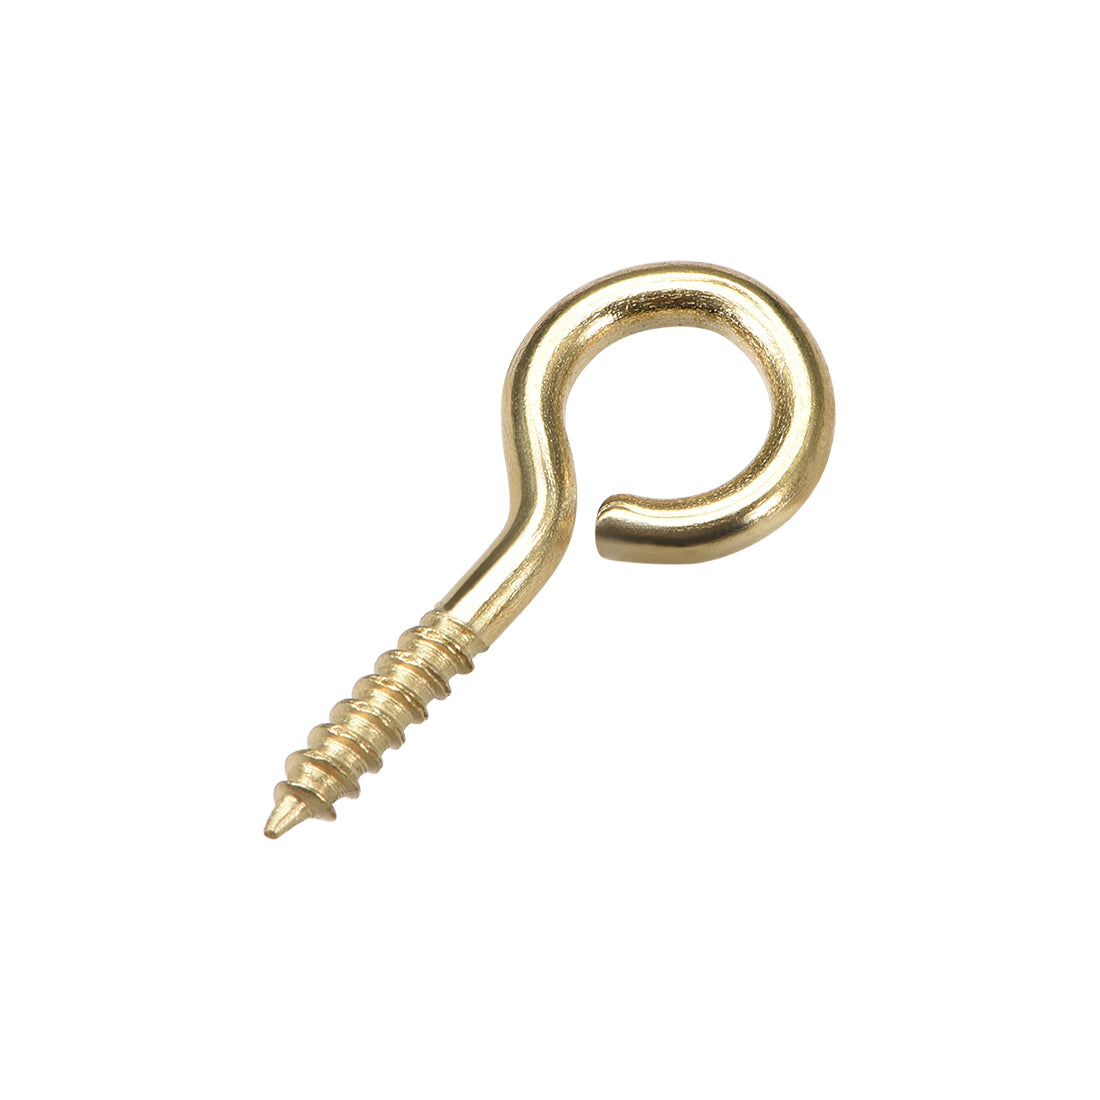 uxcell Uxcell 1.1" Small Screw Eye Hooks Self Tapping Screws Carbon Steel Screw-in Hanger Eye-Shape Ring Hooks Gold 50pcs